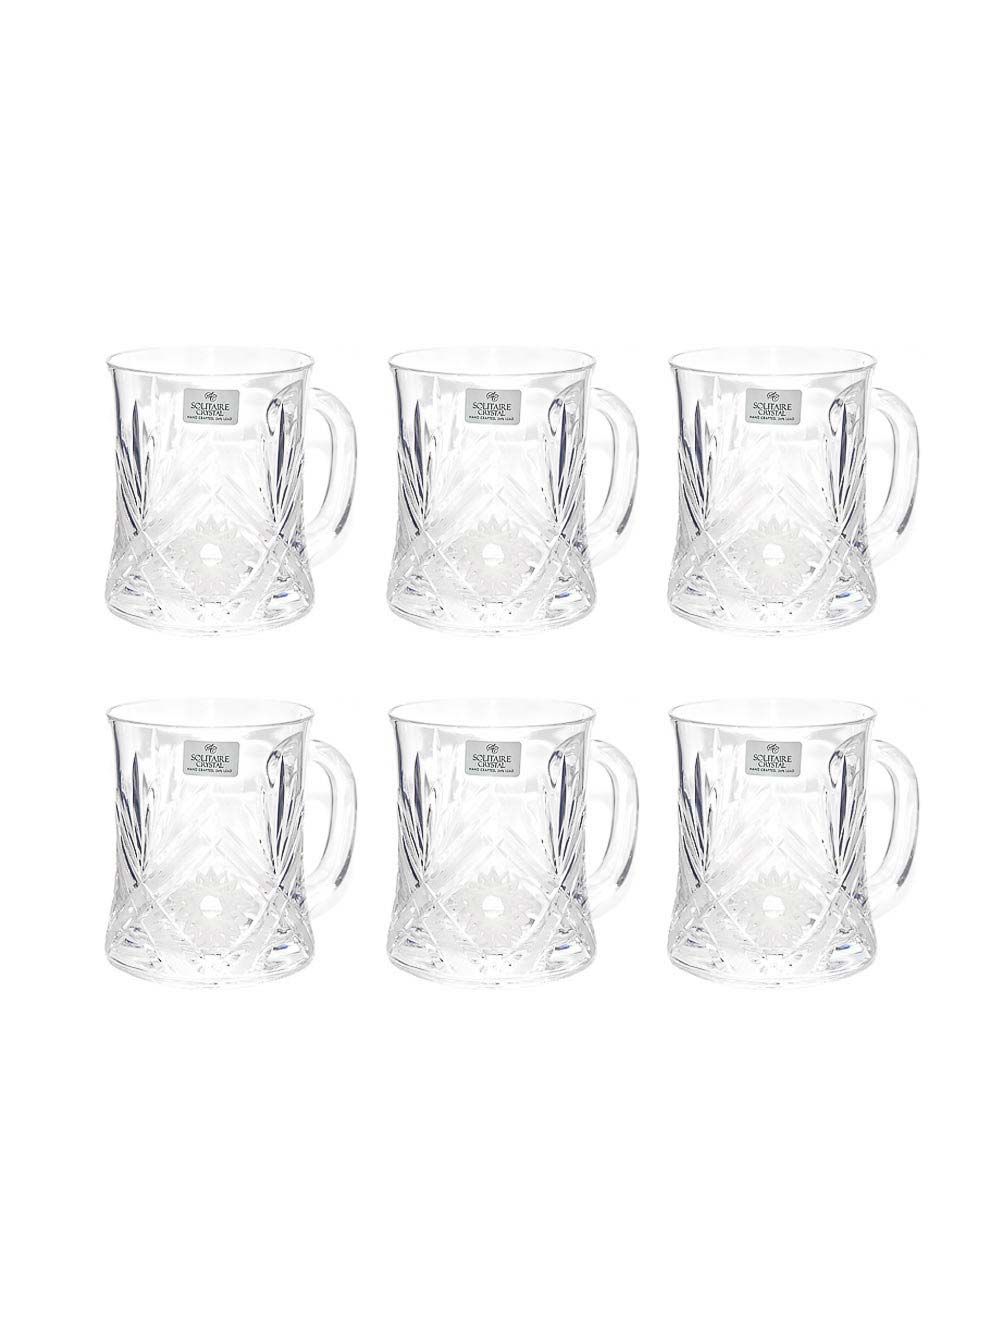 Solitaire 2-Piece Crystal Mugs